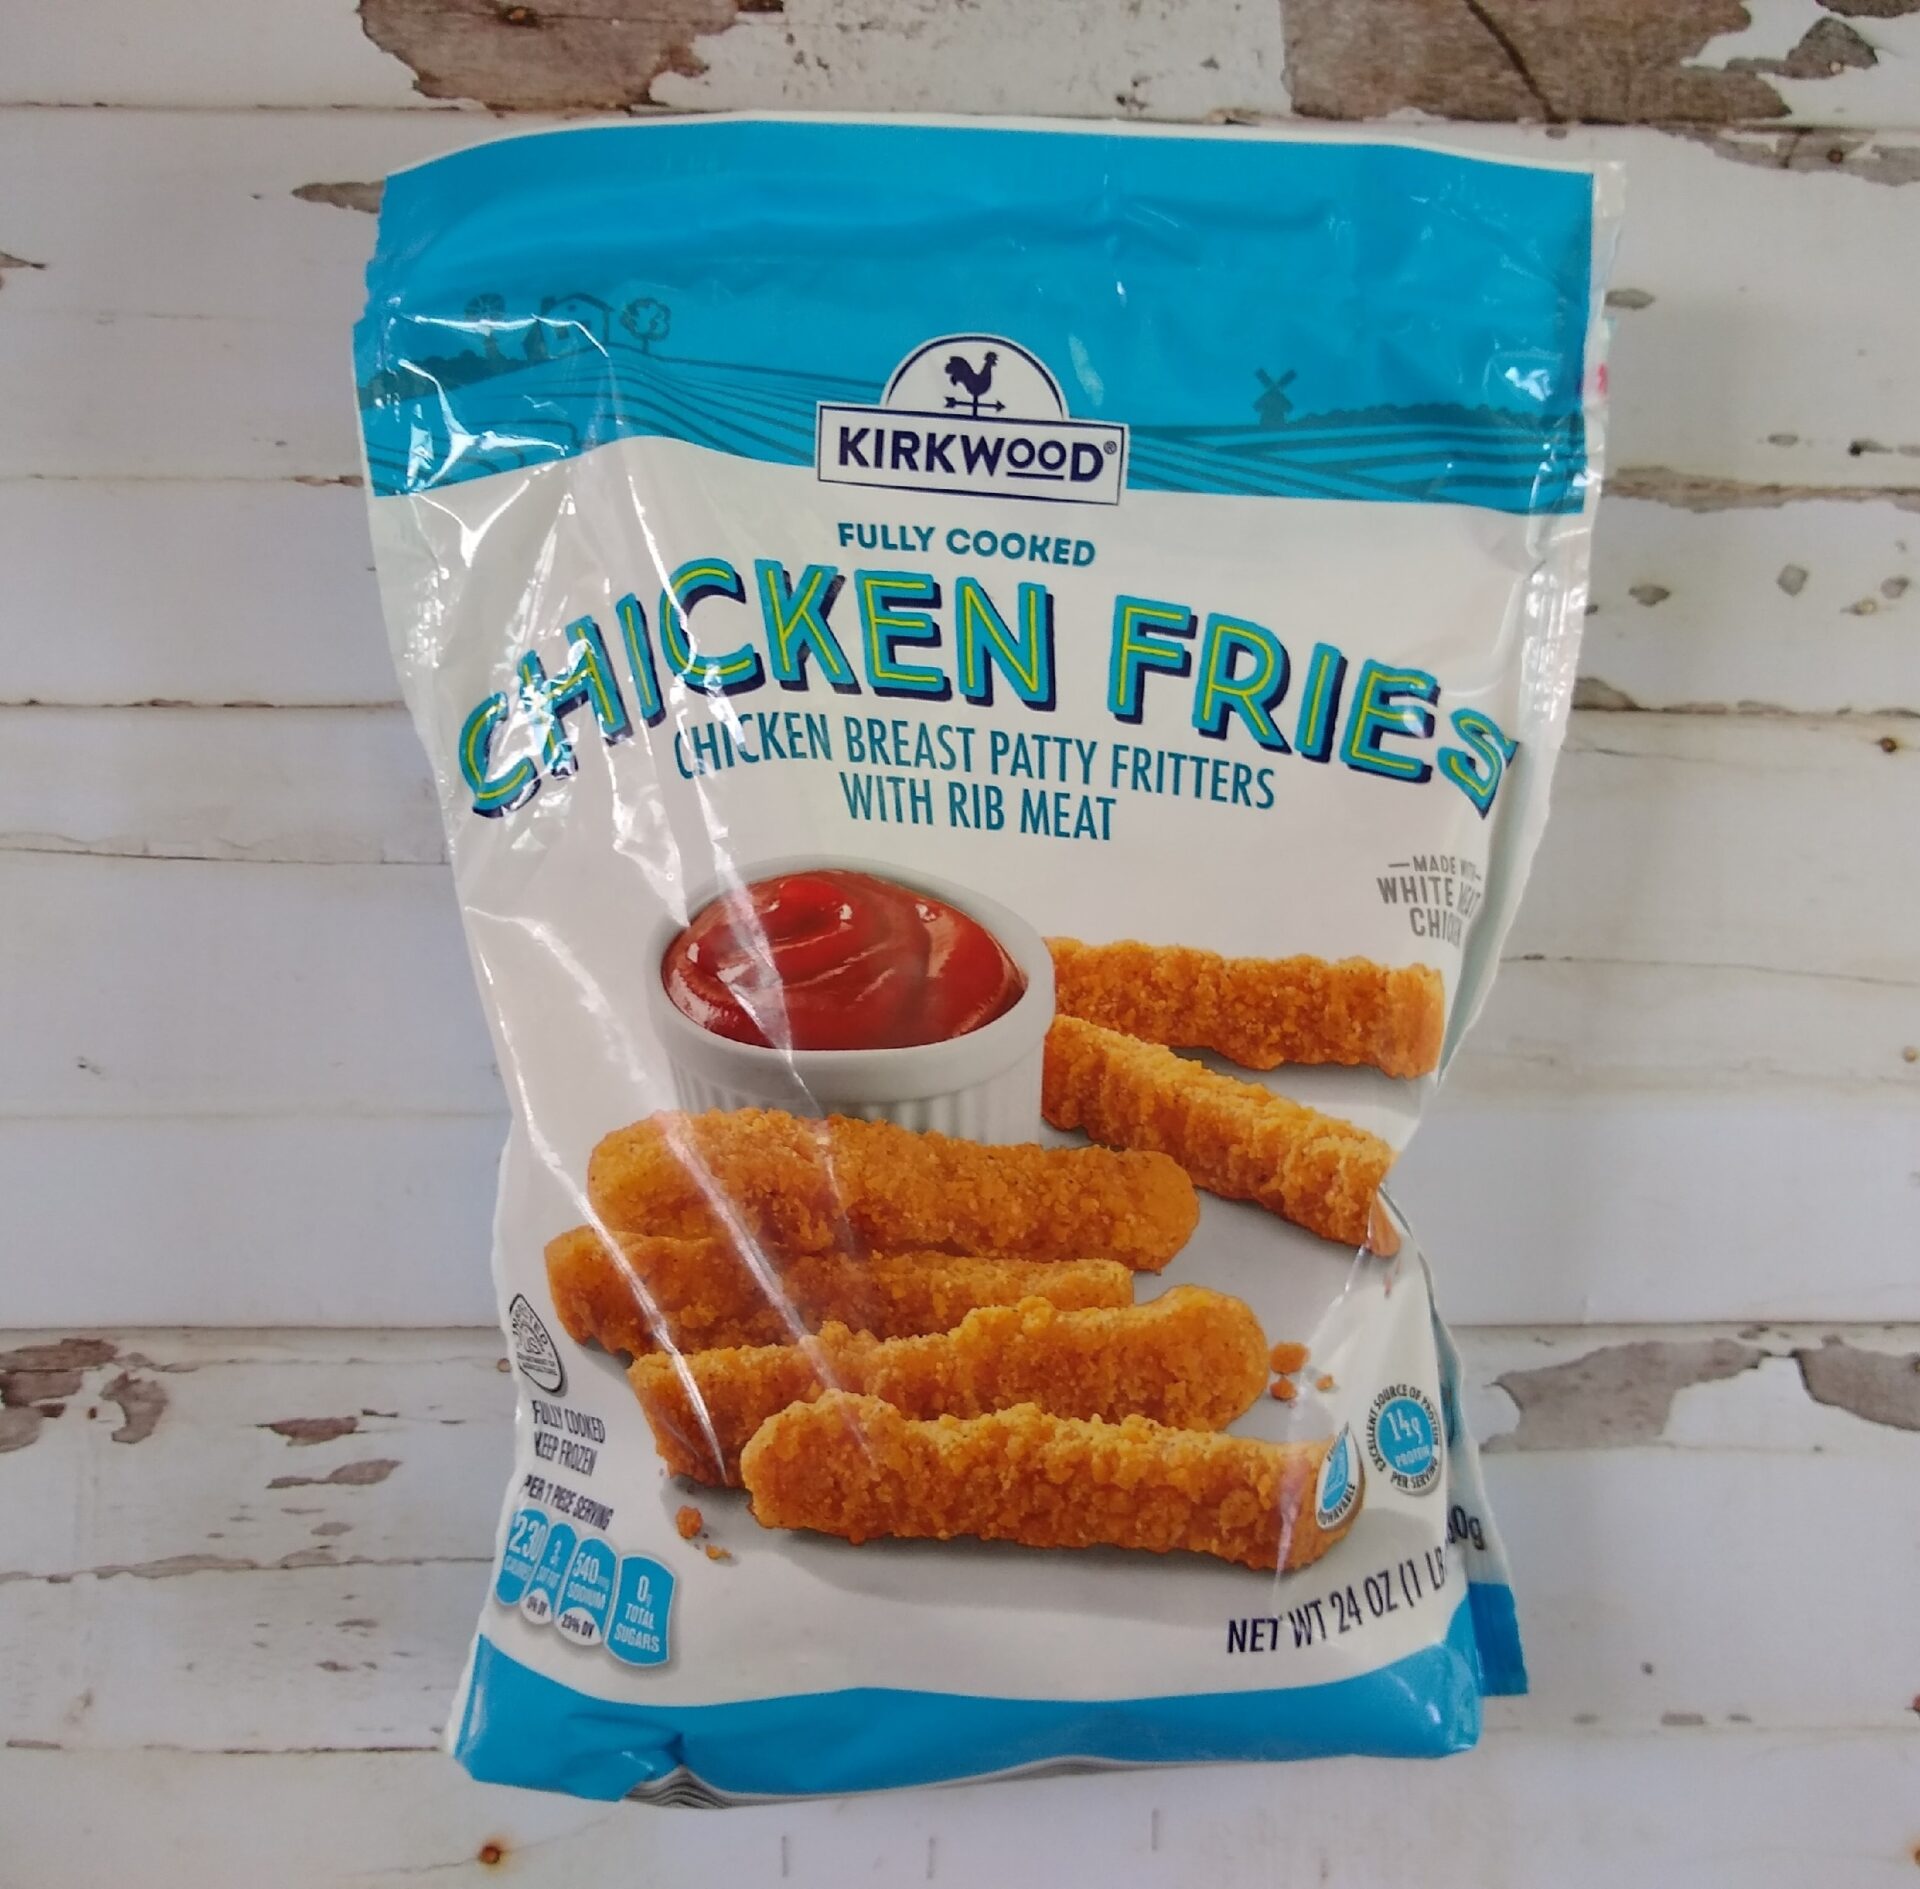 Kirkwood Fully Cooked Chicken Fries - Aldi Reviewer